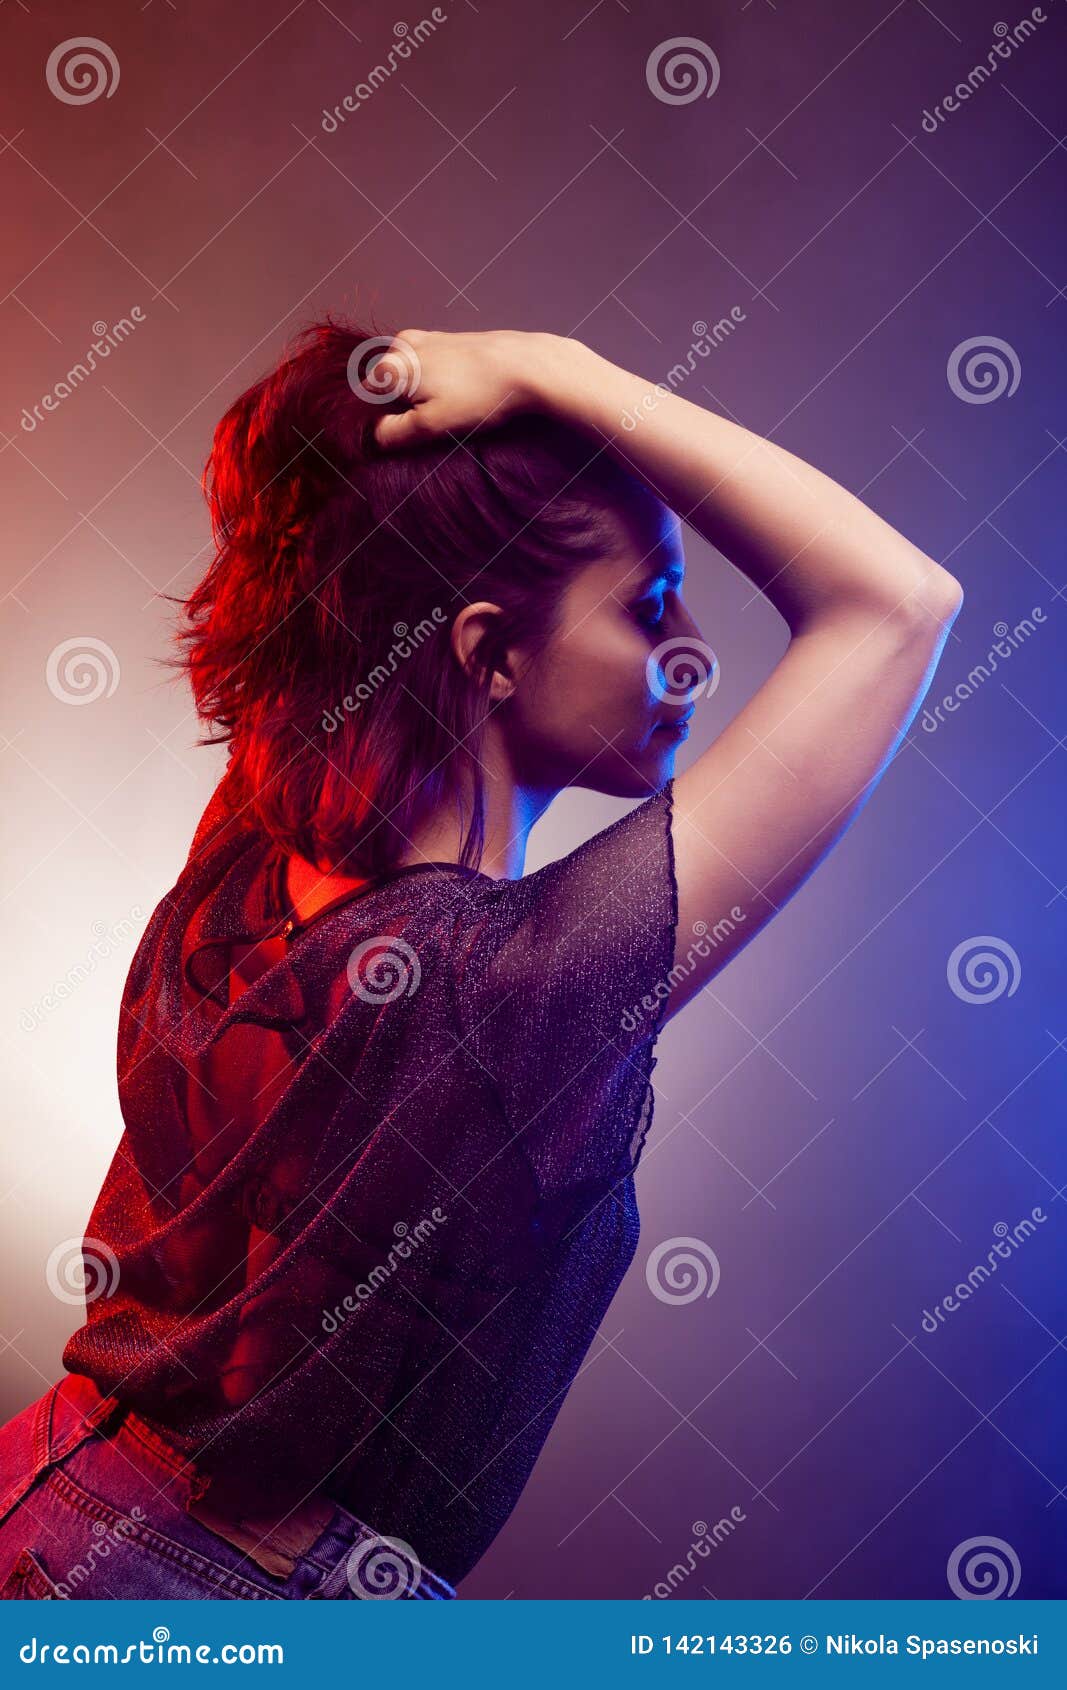 Party girl dancing stock photo. Image of female, music - 142143326